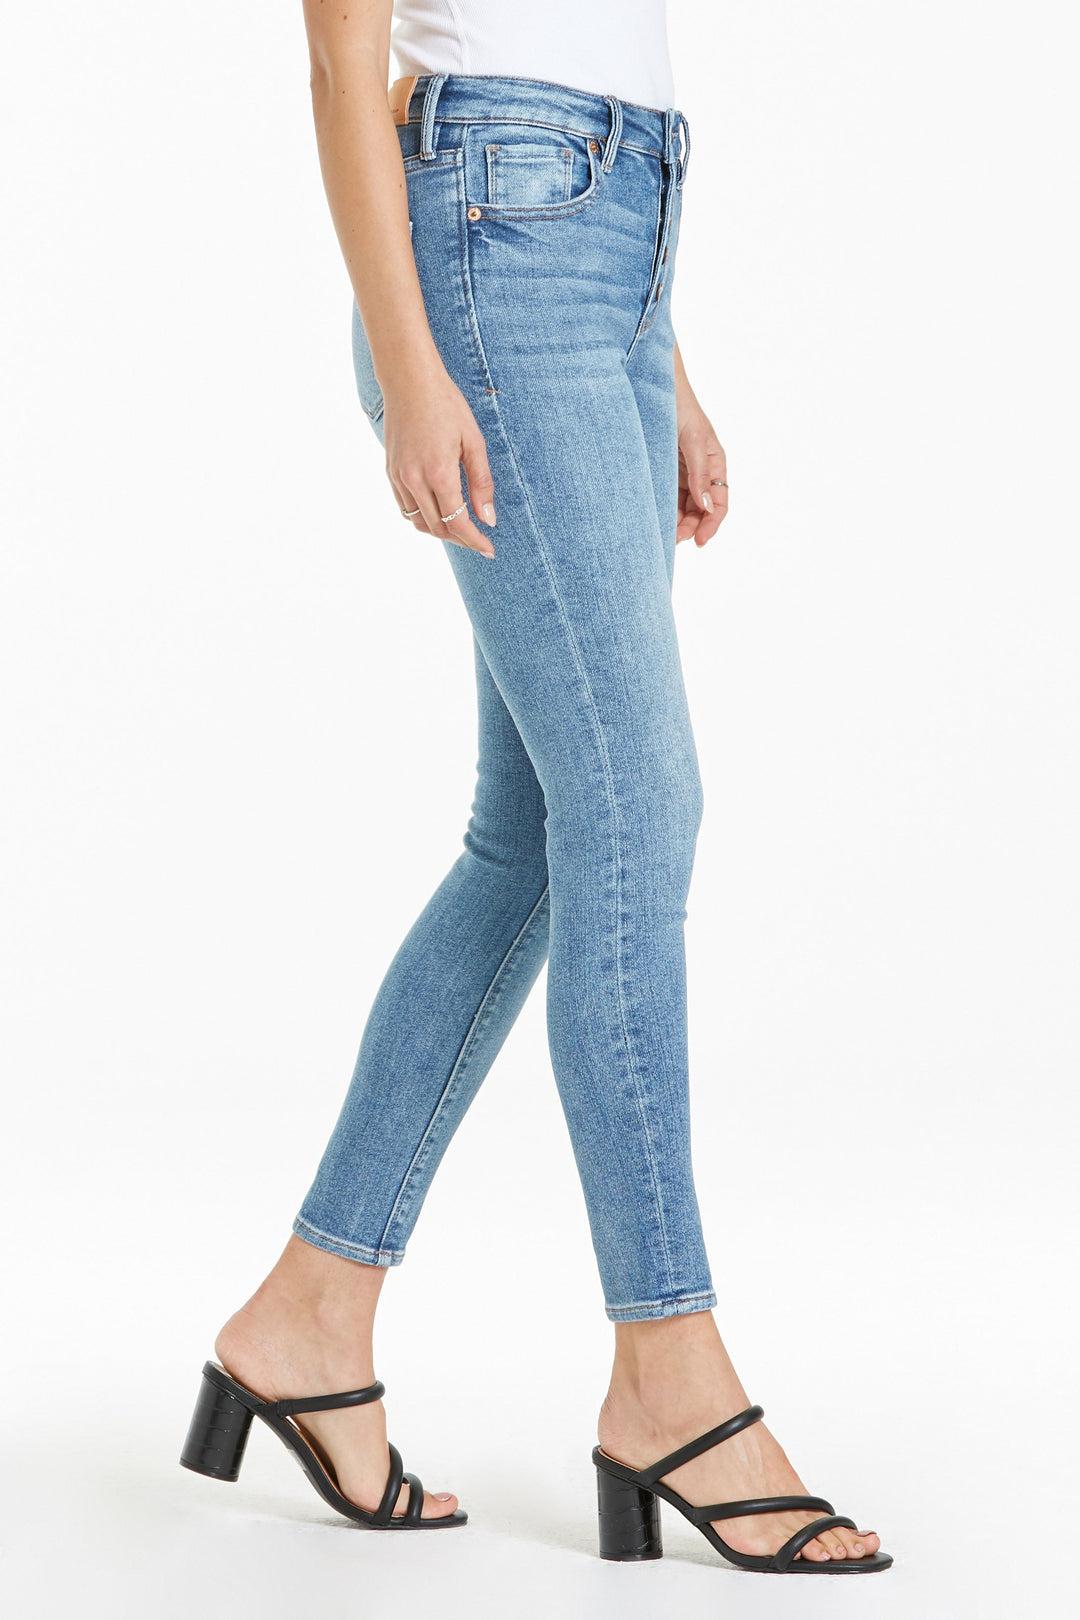 image of a female model wearing a OLIVIA SUPER HIGH RISE ANKLE SKINNY JEANS CORONADO JEANS